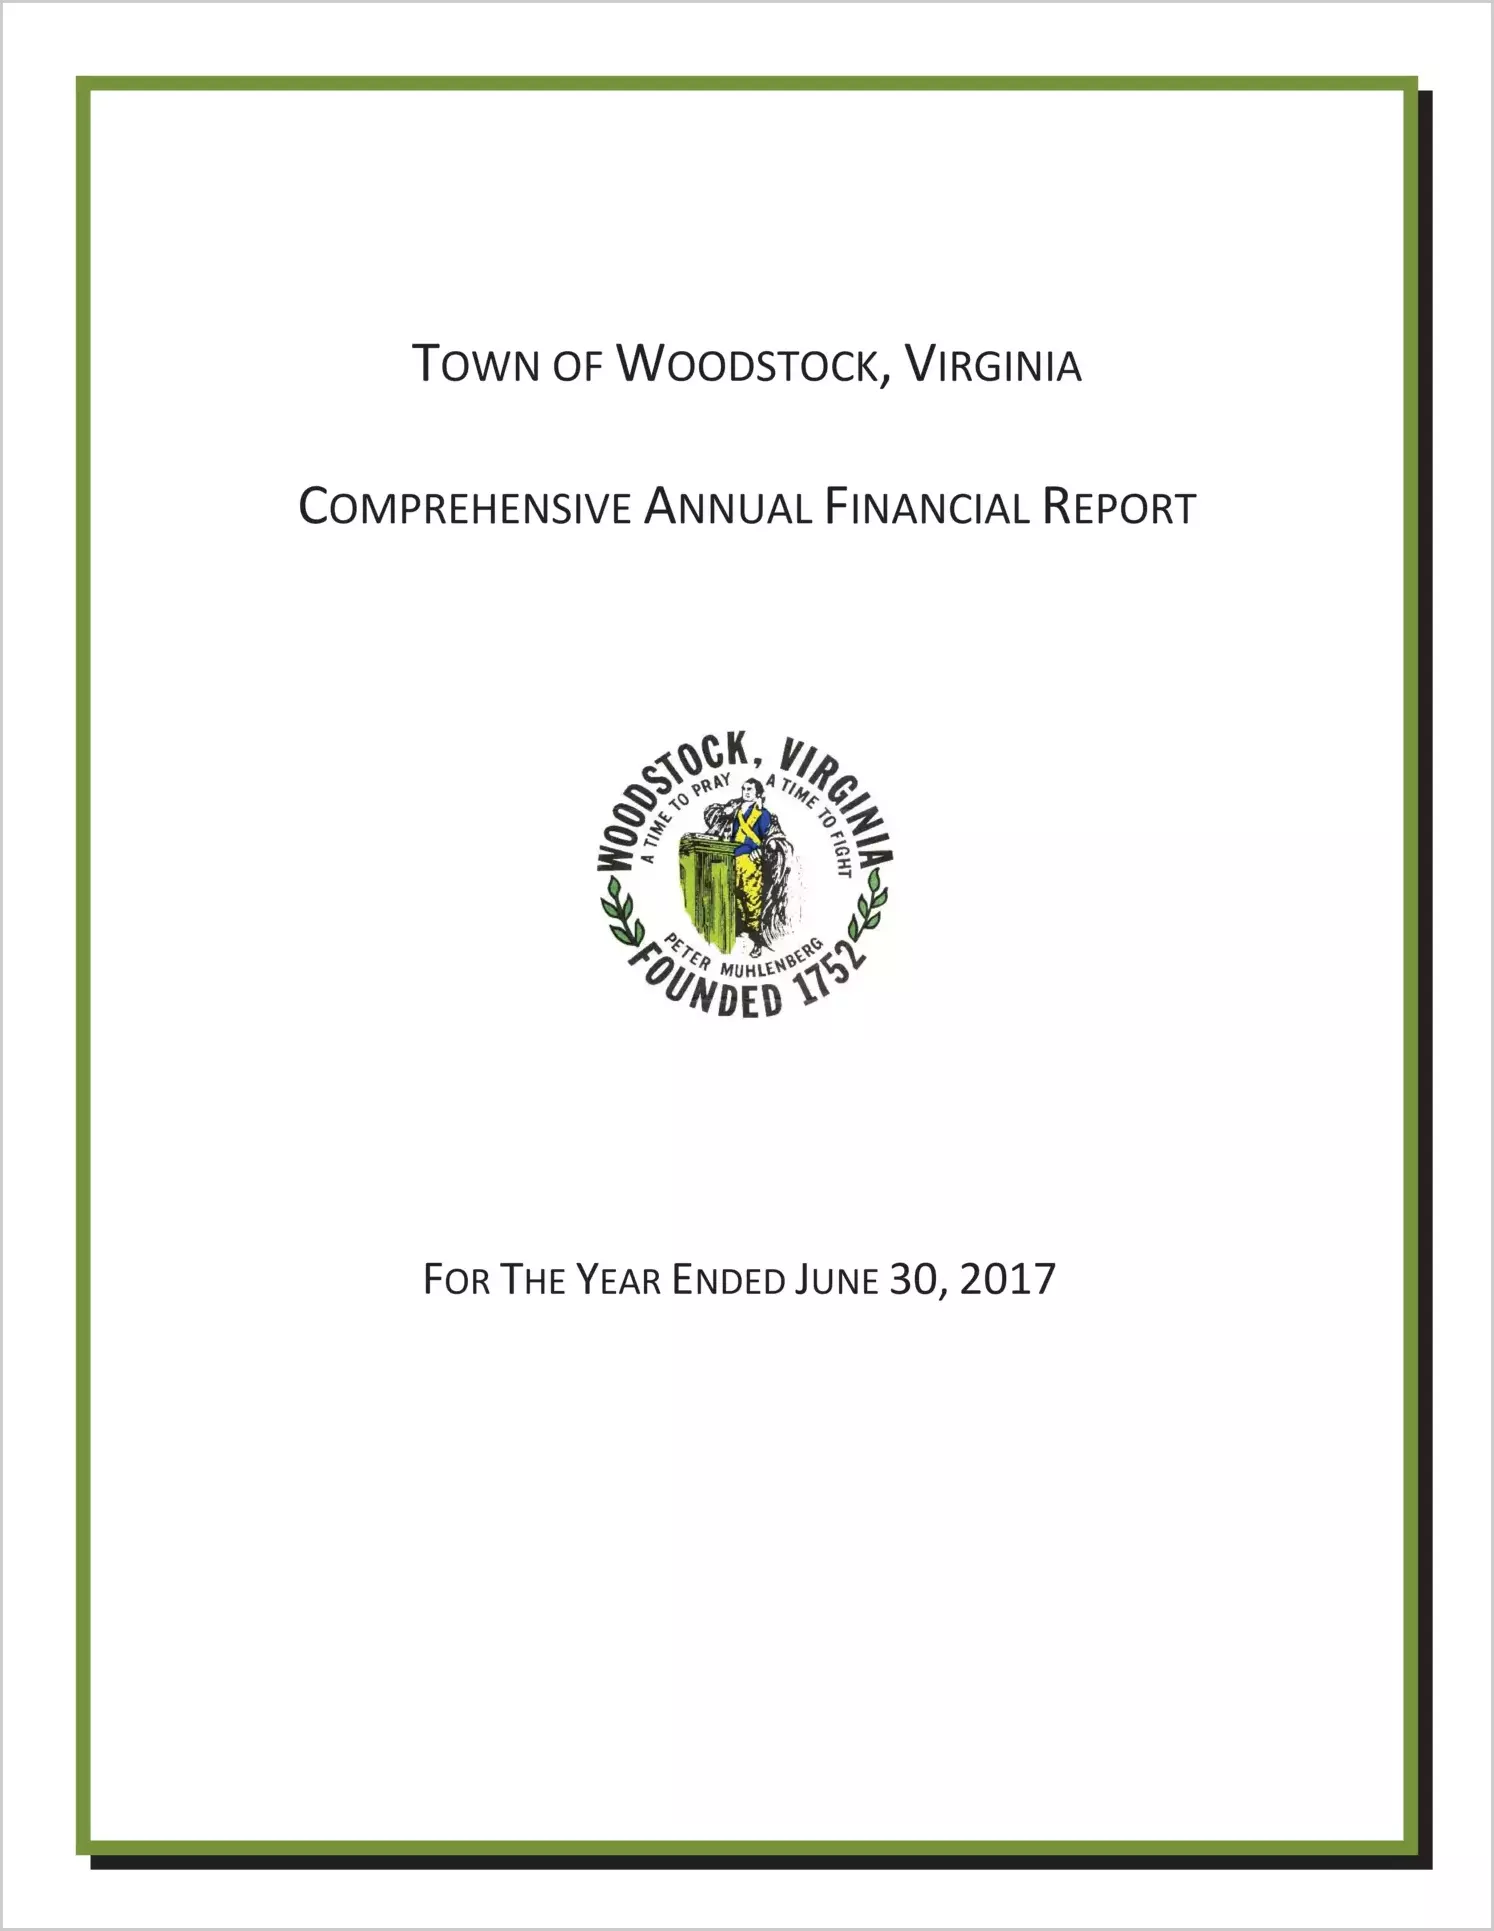 2017 Annual Financial Report for Town of Woodstock